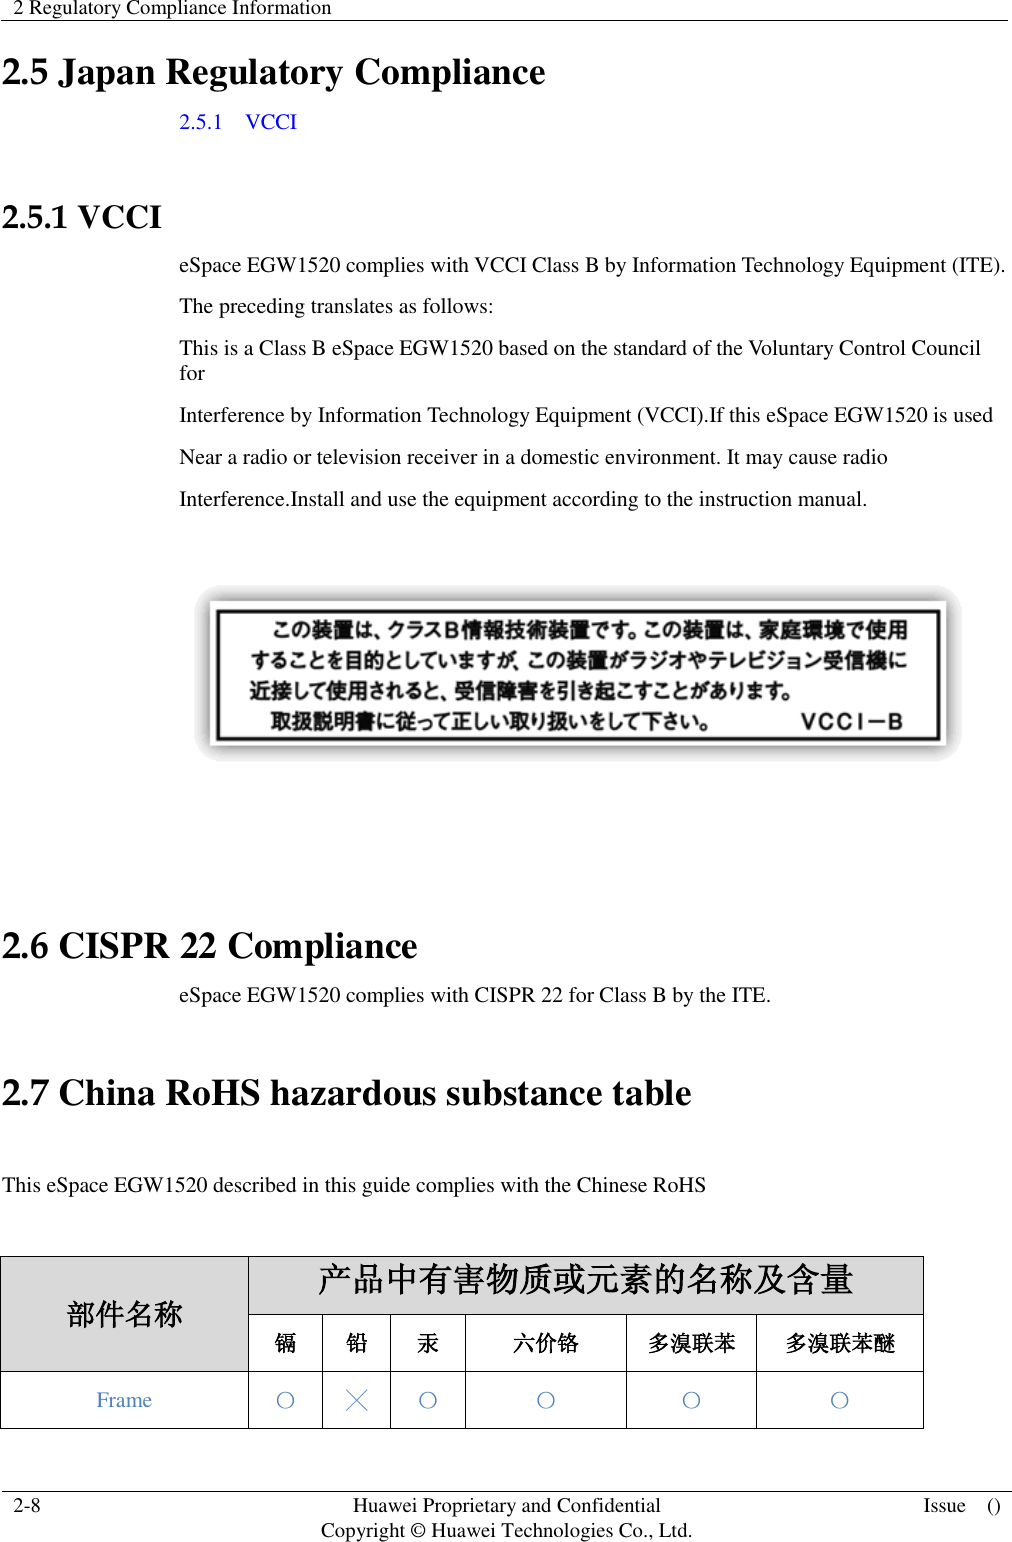 2 Regulatory Compliance Information    2-8 Huawei Proprietary and Confidential                                     Copyright © Huawei Technologies Co., Ltd. Issue    ()  2.5 Japan Regulatory Compliance 2.5.1    VCCI  2.5.1 VCCI eSpace EGW1520 complies with VCCI Class B by Information Technology Equipment (ITE). The preceding translates as follows: This is a Class B eSpace EGW1520 based on the standard of the Voluntary Control Council for Interference by Information Technology Equipment (VCCI).If this eSpace EGW1520 is used Near a radio or television receiver in a domestic environment. It may cause radio Interference.Install and use the equipment according to the instruction manual.     2.6 CISPR 22 Compliance eSpace EGW1520 complies with CISPR 22 for Class B by the ITE. 2.7 China RoHS hazardous substance table  This eSpace EGW1520 described in this guide complies with the Chinese RoHS  部件名称 产品中有害物质或元素的名称及含量 镉 铅 汞 六价铬 多溴联苯 多溴联苯醚 Frame 〇 ╳ 〇 〇 〇 〇 